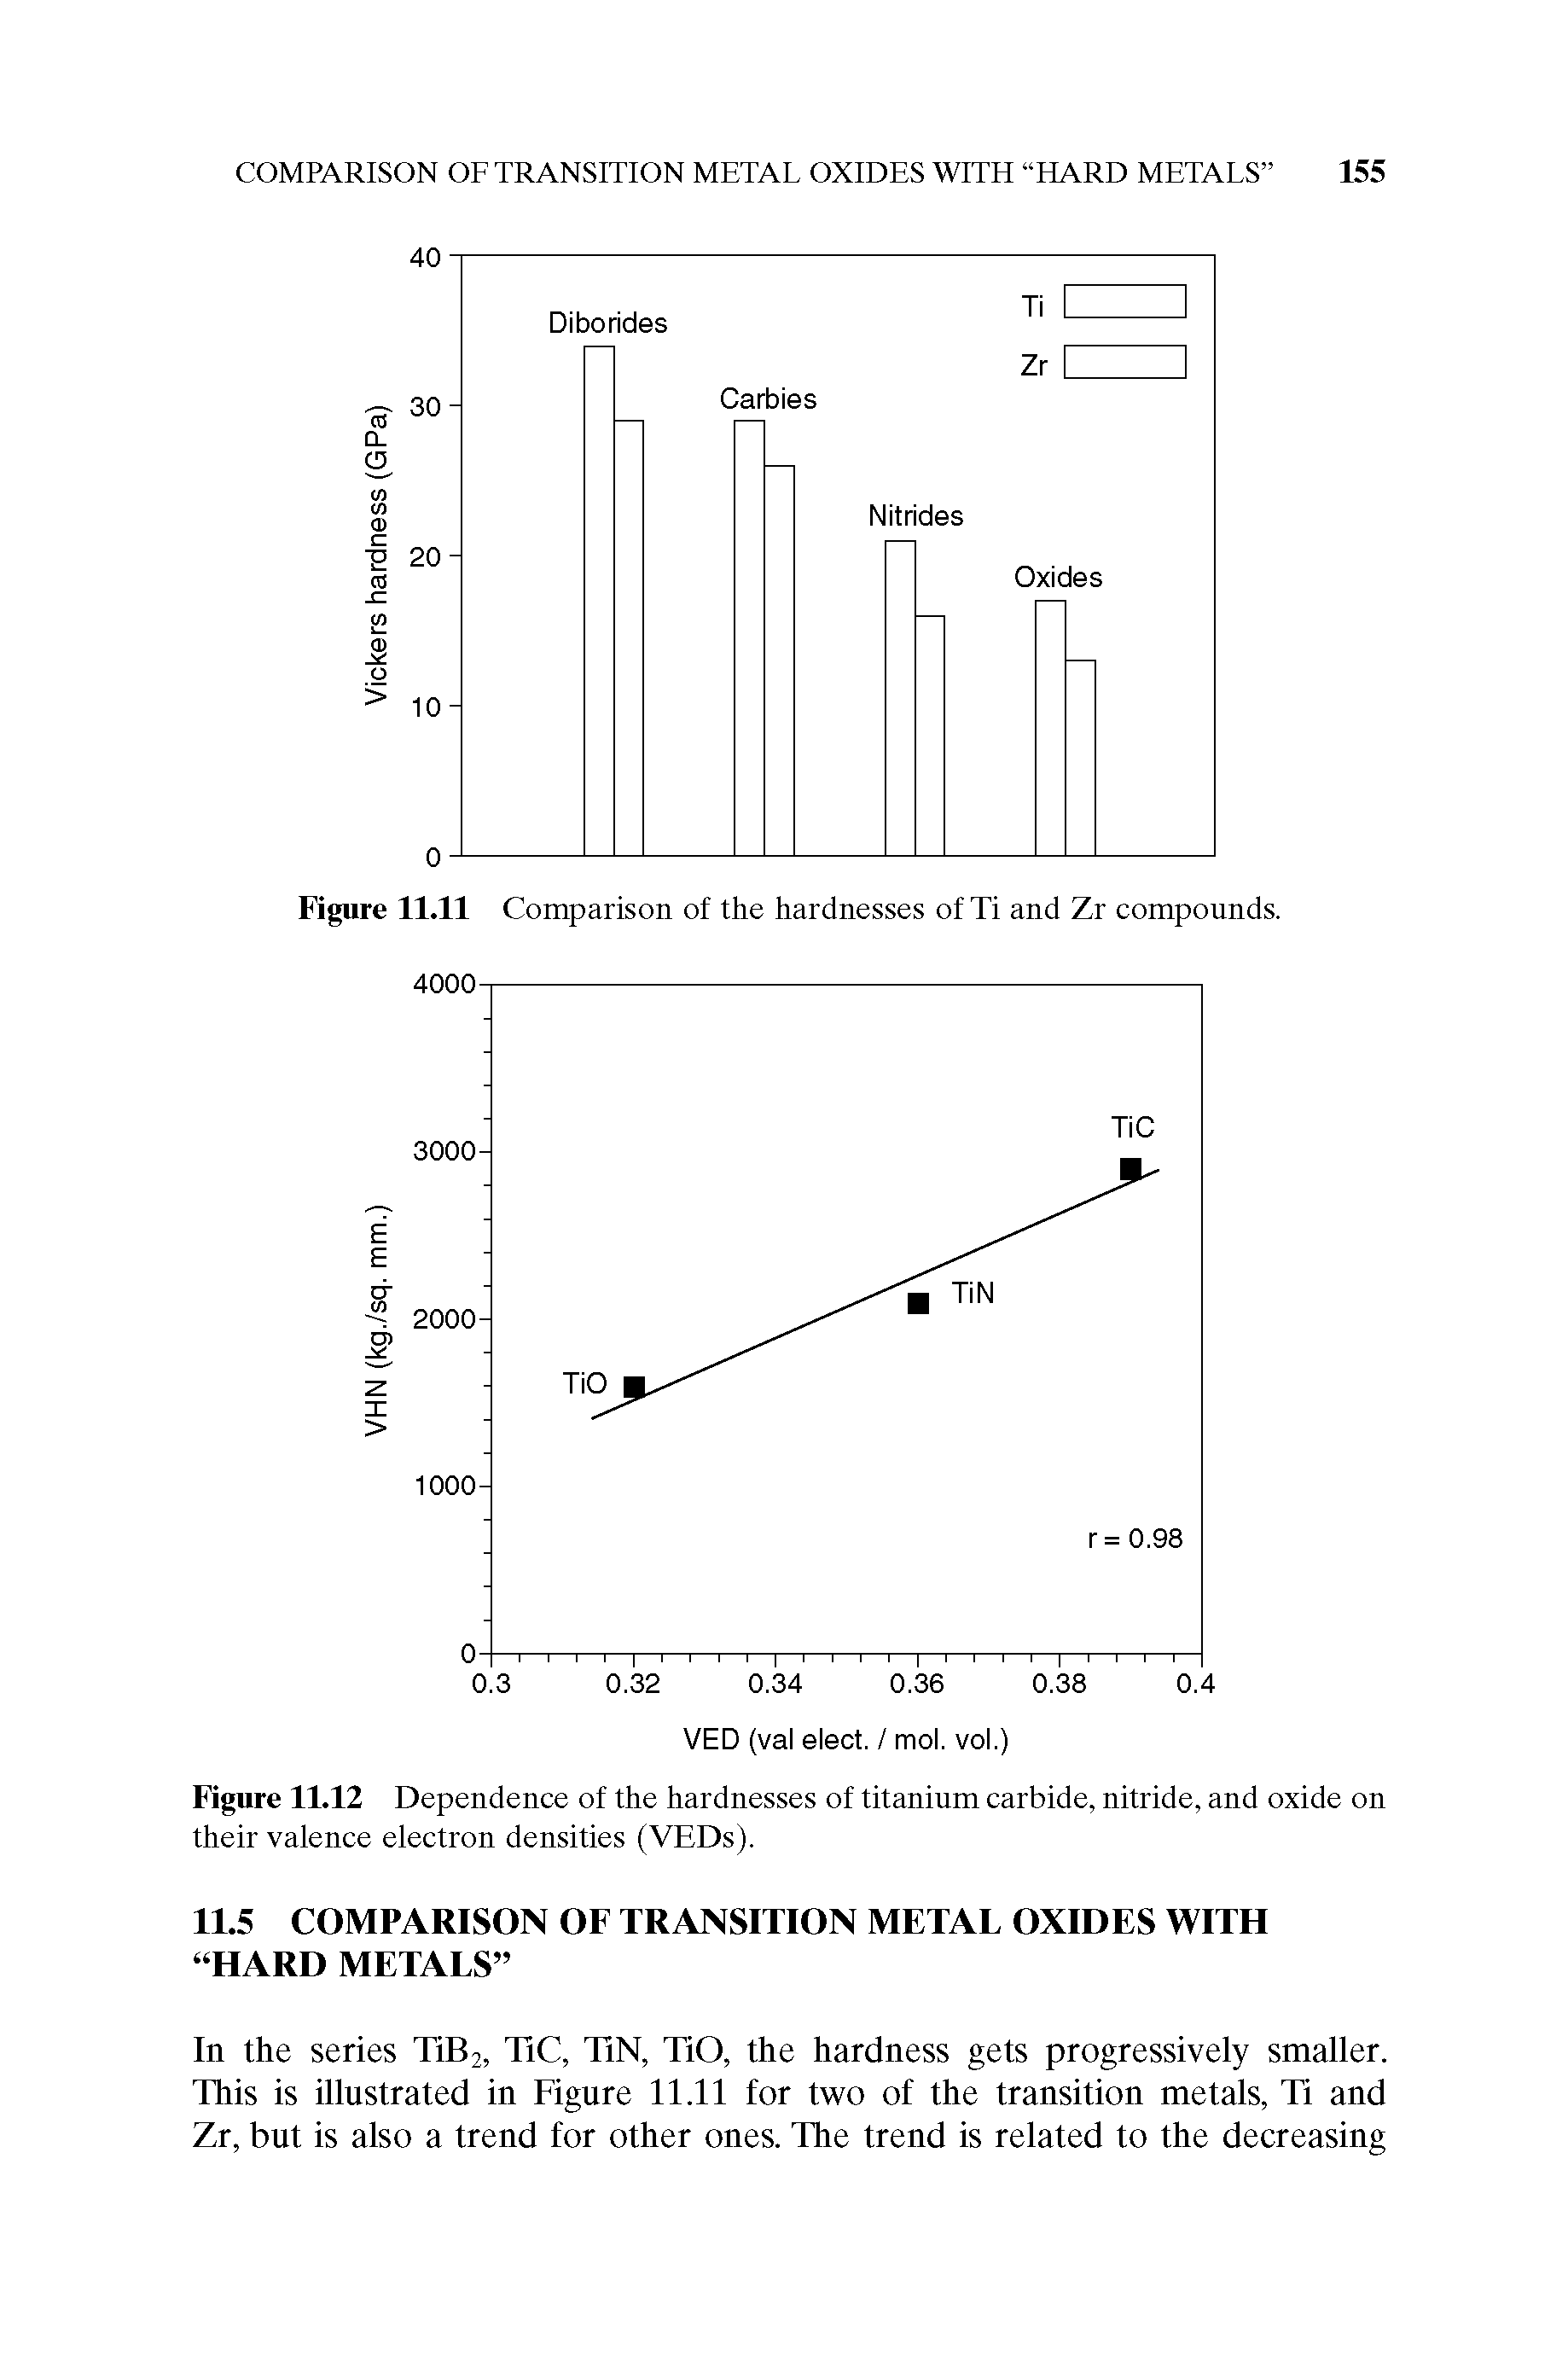 Figure 11.12 Dependence of the hardnesses of titanium carbide, nitride, and oxide on their valence electron densities (VEDs).